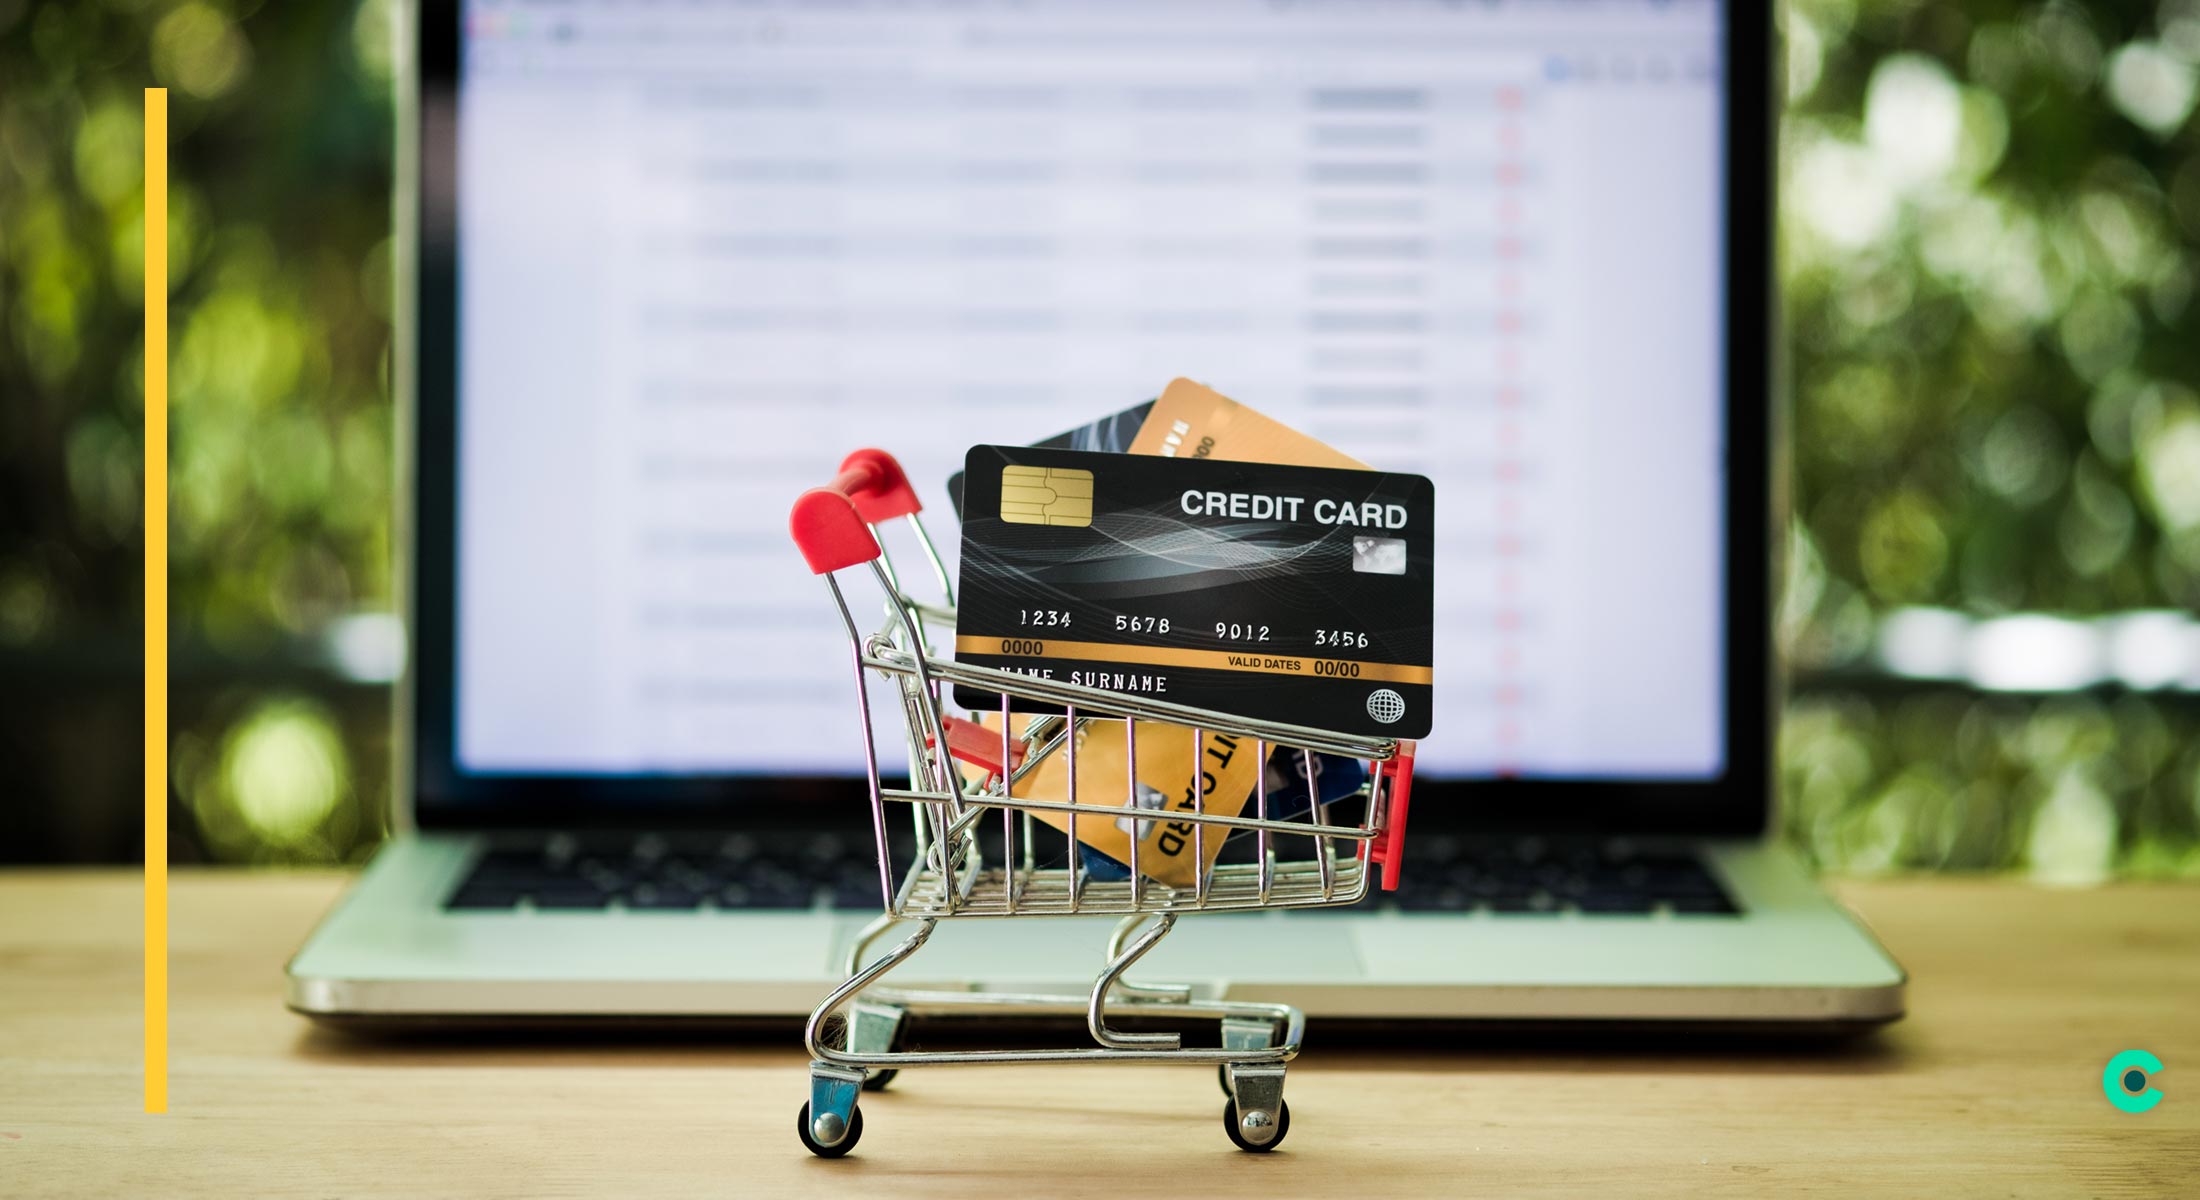 A tiny grocery cart filled with credit cards sits in front of a laptop displaying a checkout screen